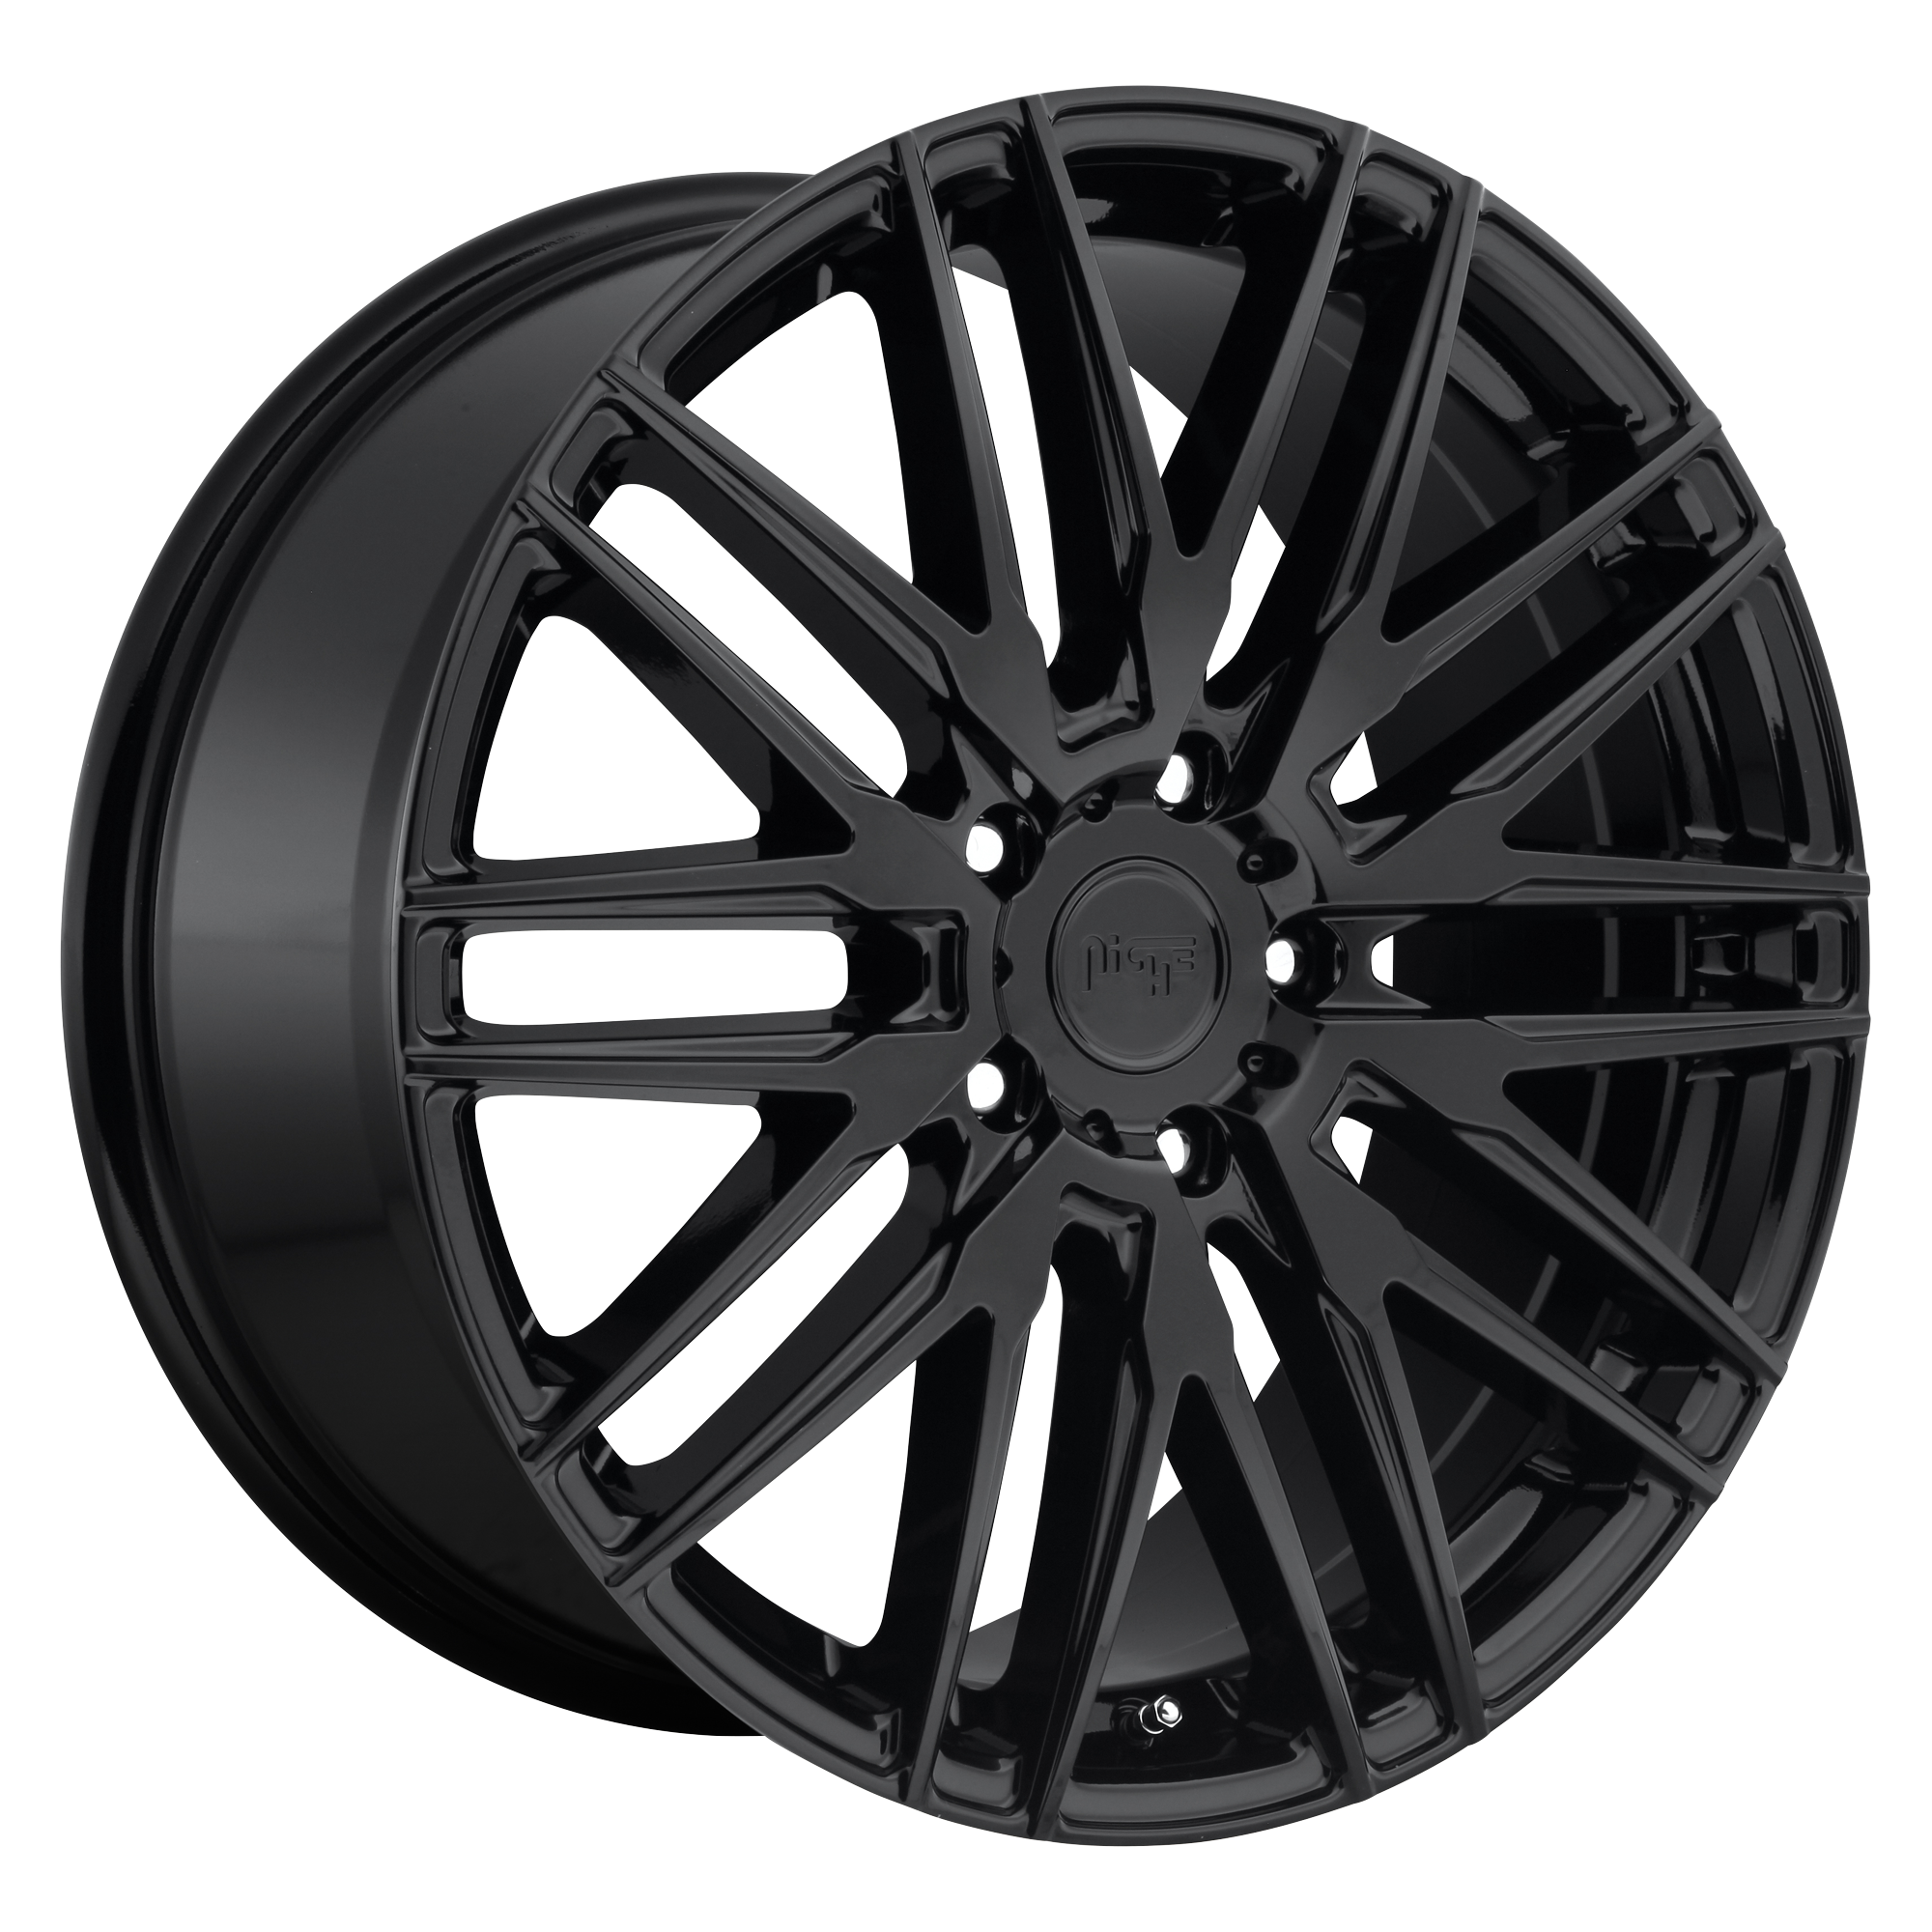 ANZIO 22x10.5 5x120.00 GLOSS BLACK (40 mm) - Tires and Engine Performance